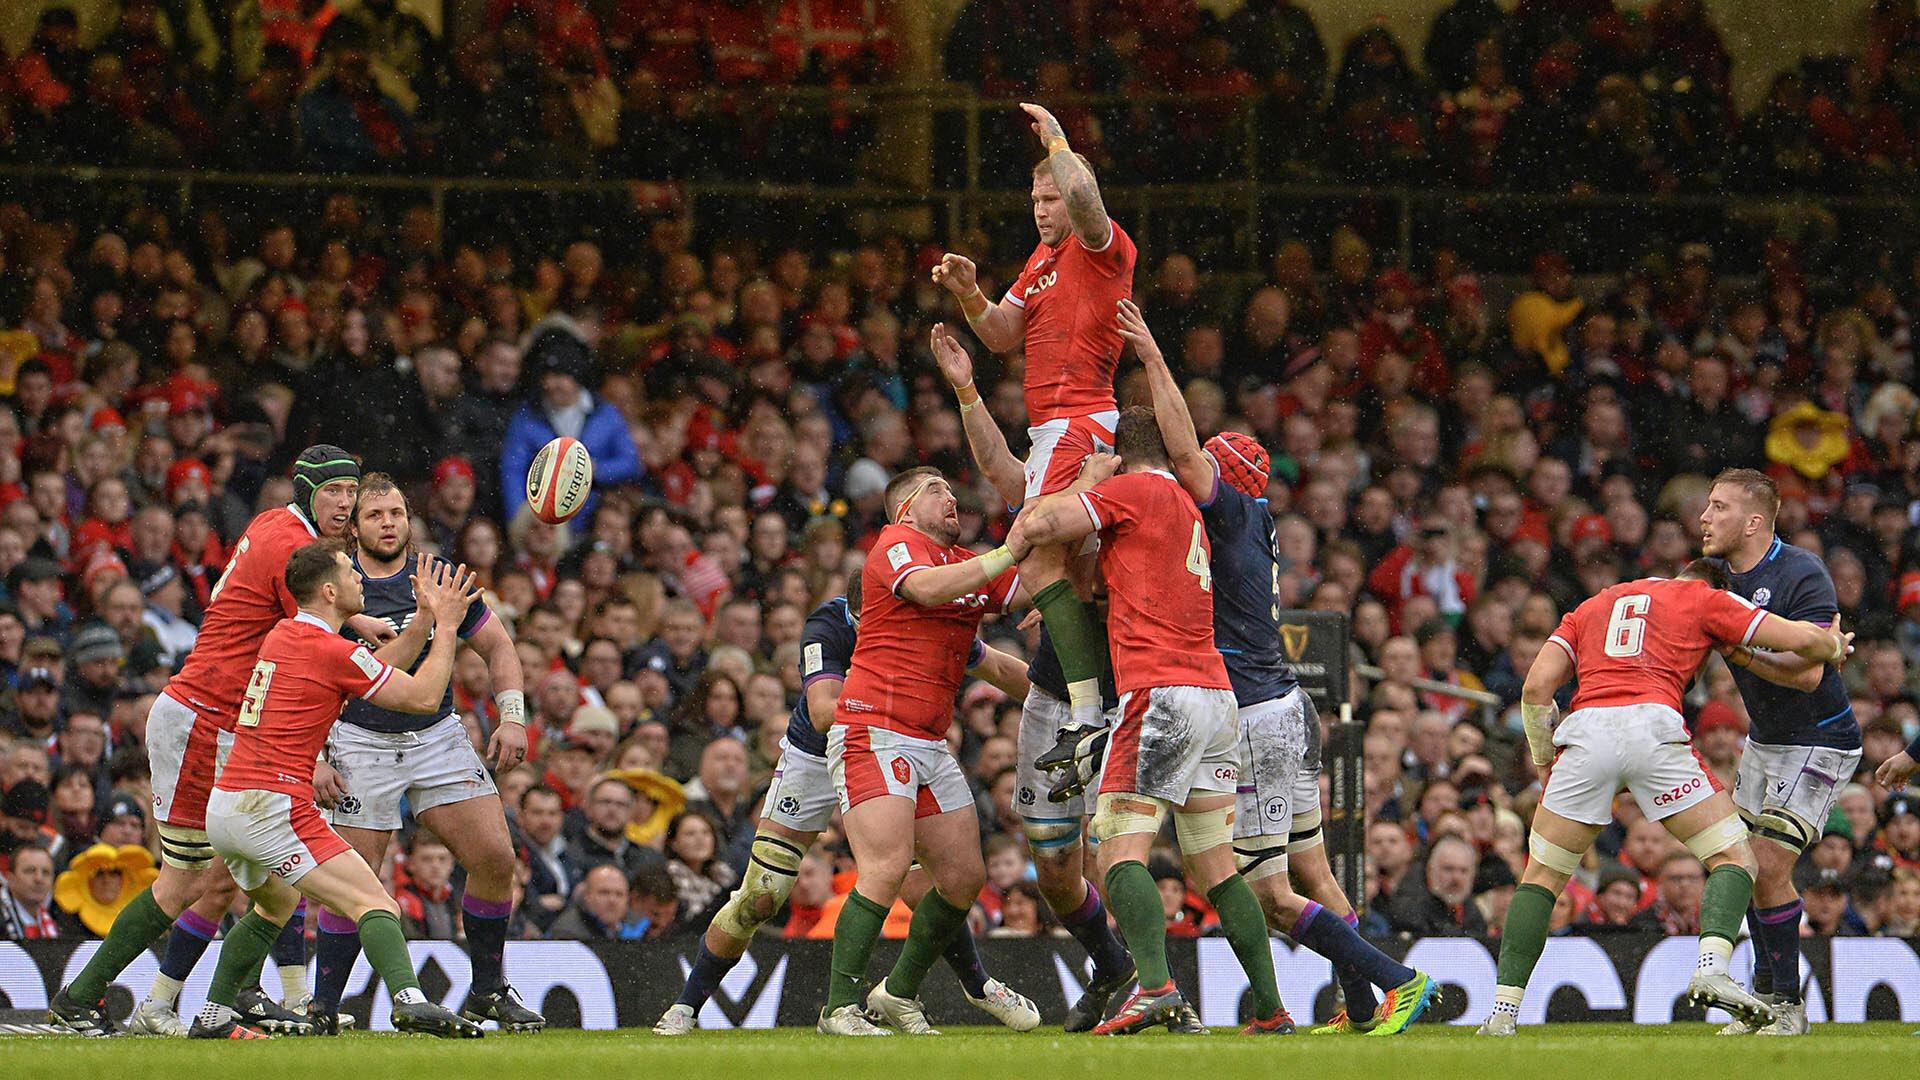 CARDIFF, WALES - FEBRUARY 12:Ross Moriarty of Wales wins the line out   during the Guinness Six Nations Round 2 match between Wales and Scotland at Principality Stadium on February 12, 2022 in Cardiff, Wales. (Photo by Ian Cook - CameraSport via Getty Images)